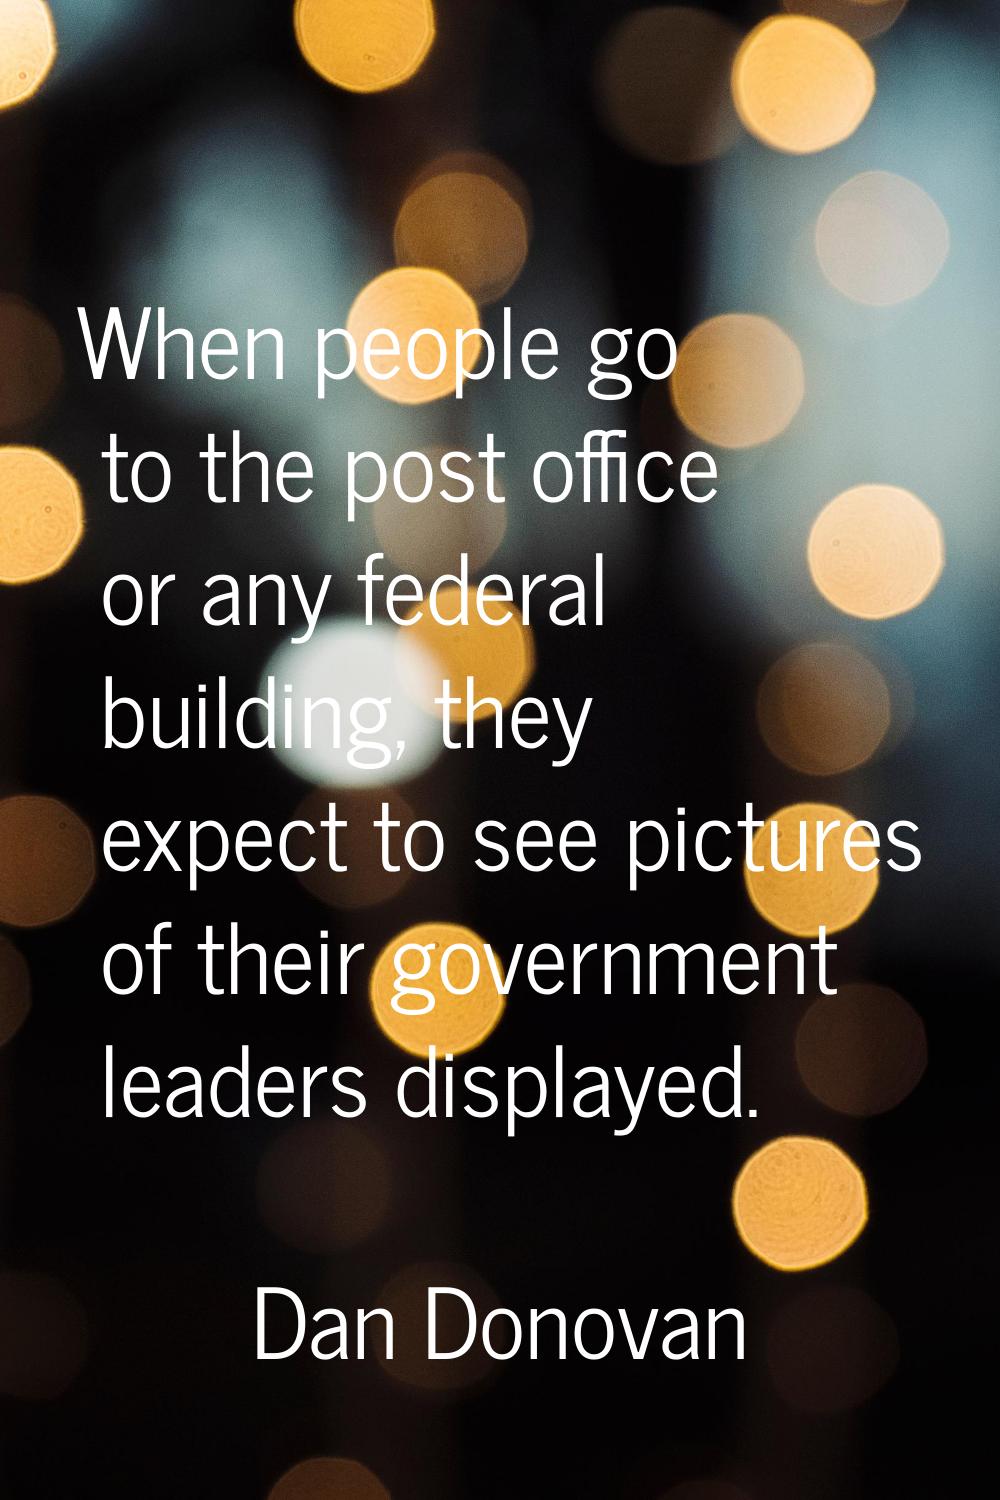 When people go to the post office or any federal building, they expect to see pictures of their gov